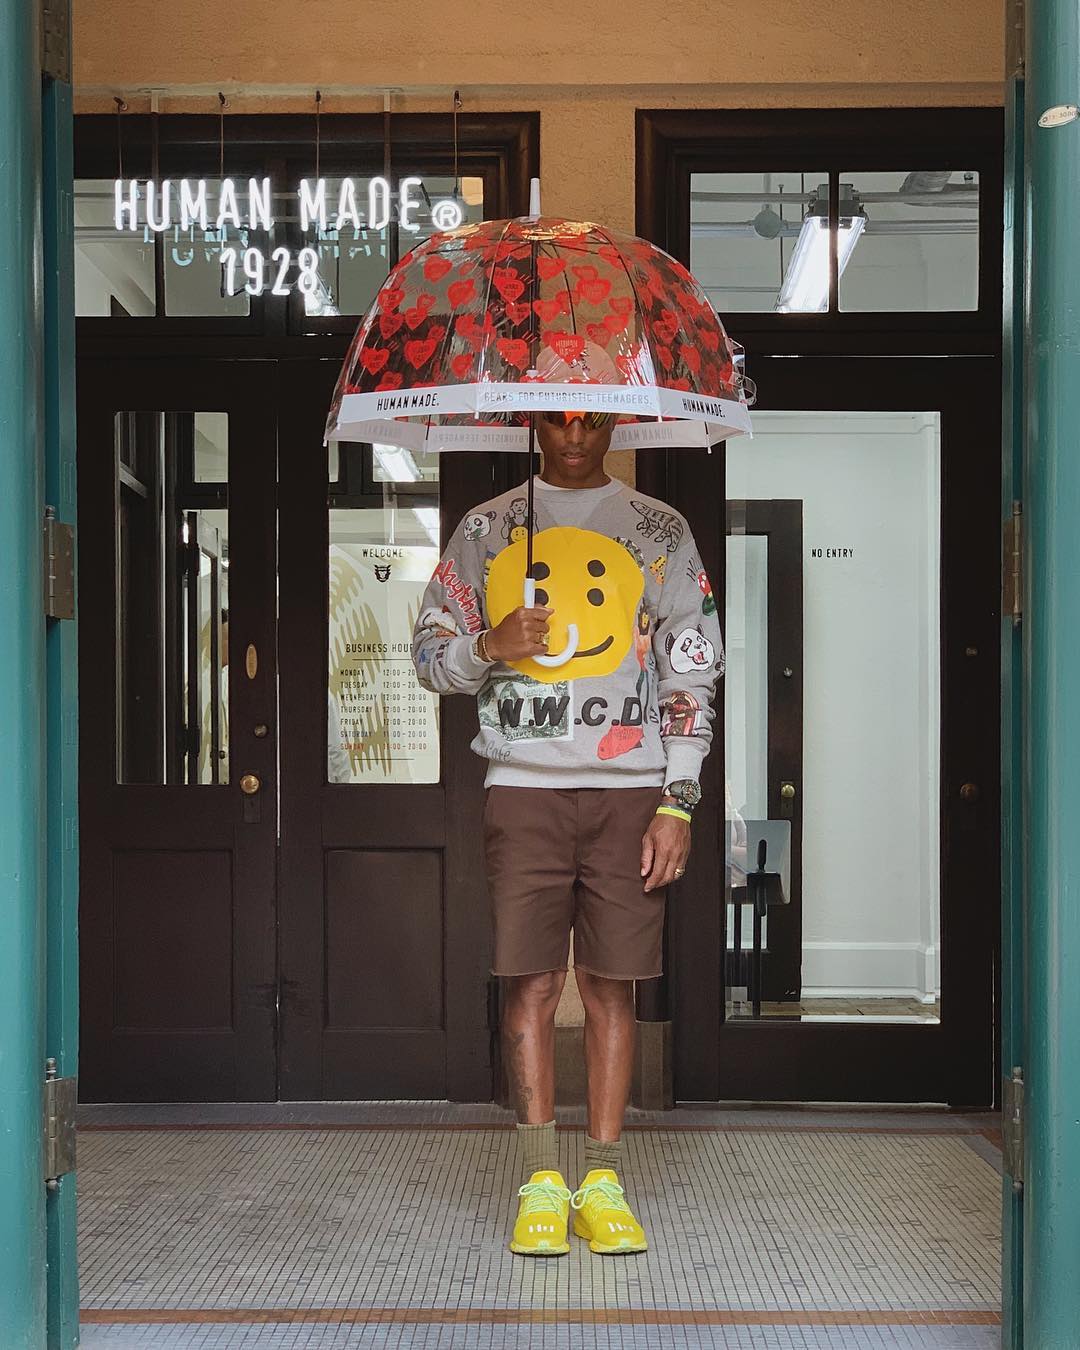 SPOTTED: Pharrell Williams Hits Human Made in Kyoto, Japan